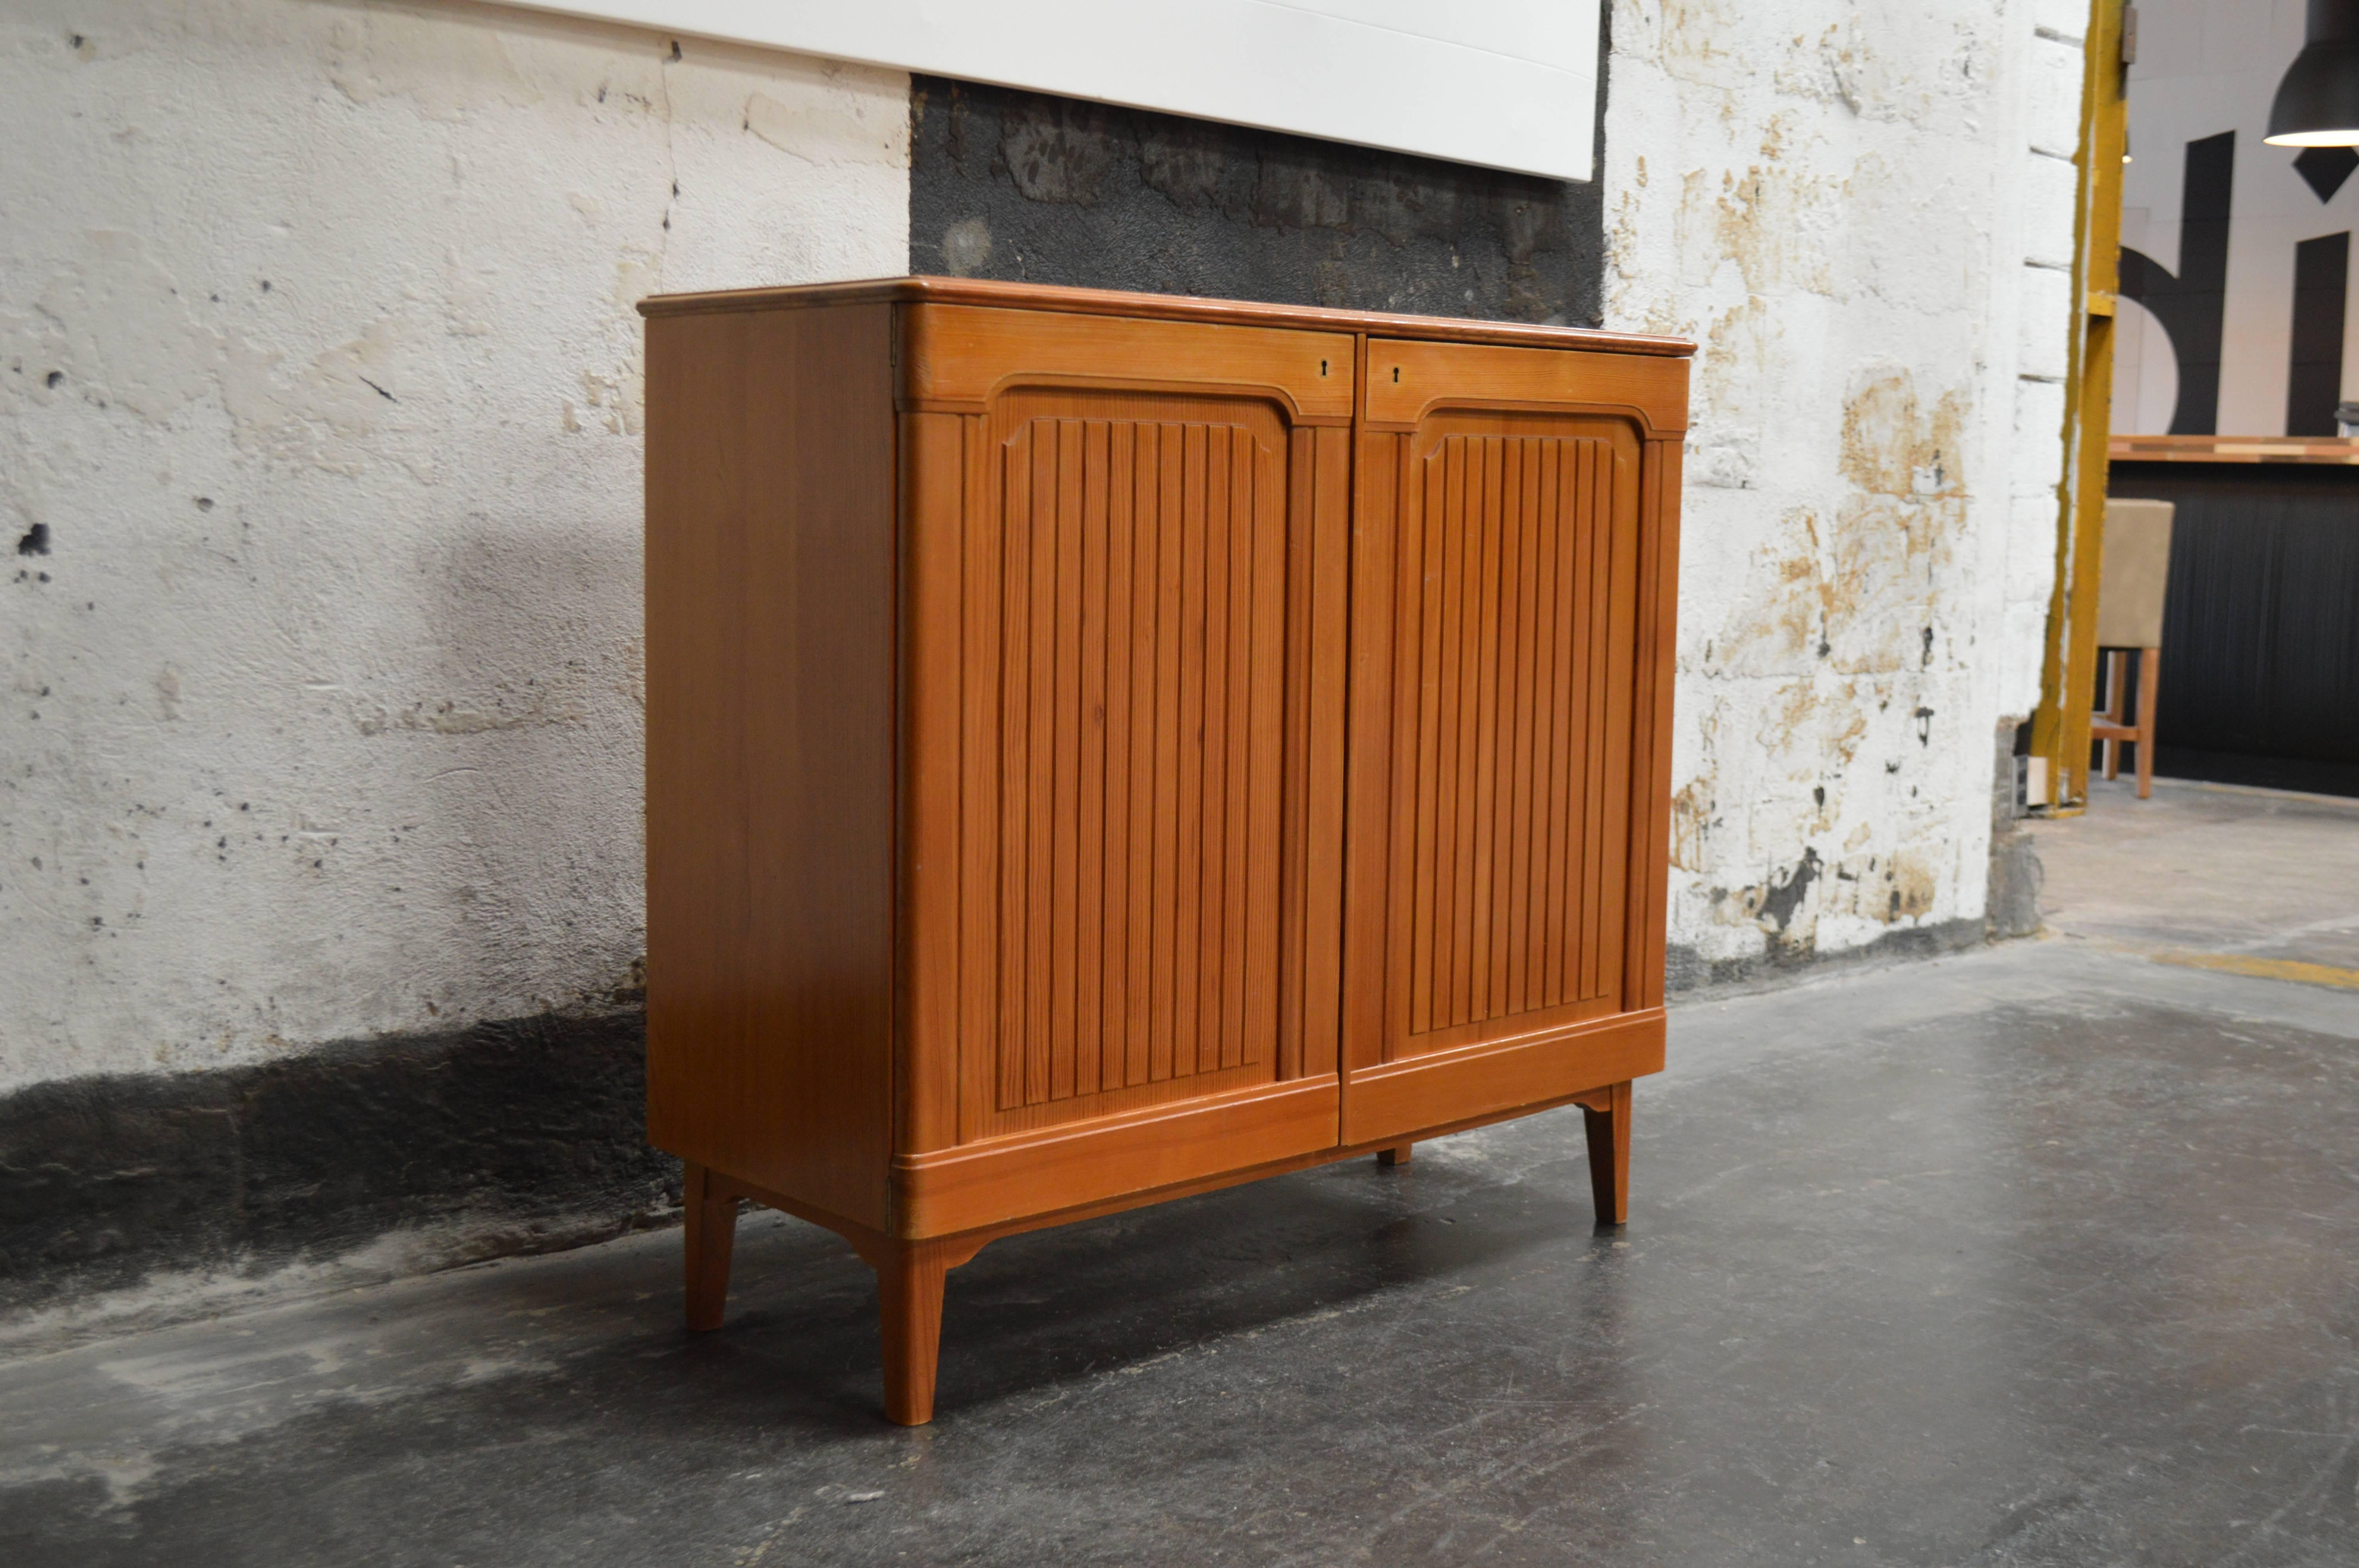 Mid-Century Svenska fur (Swedish Pine) storage cabinet by Carl Malmsten. Fluted doors open to reveal shelves and drawers. All shelves and drawers are adjustable to configure however you like. Excellent vintage condition. Key included.